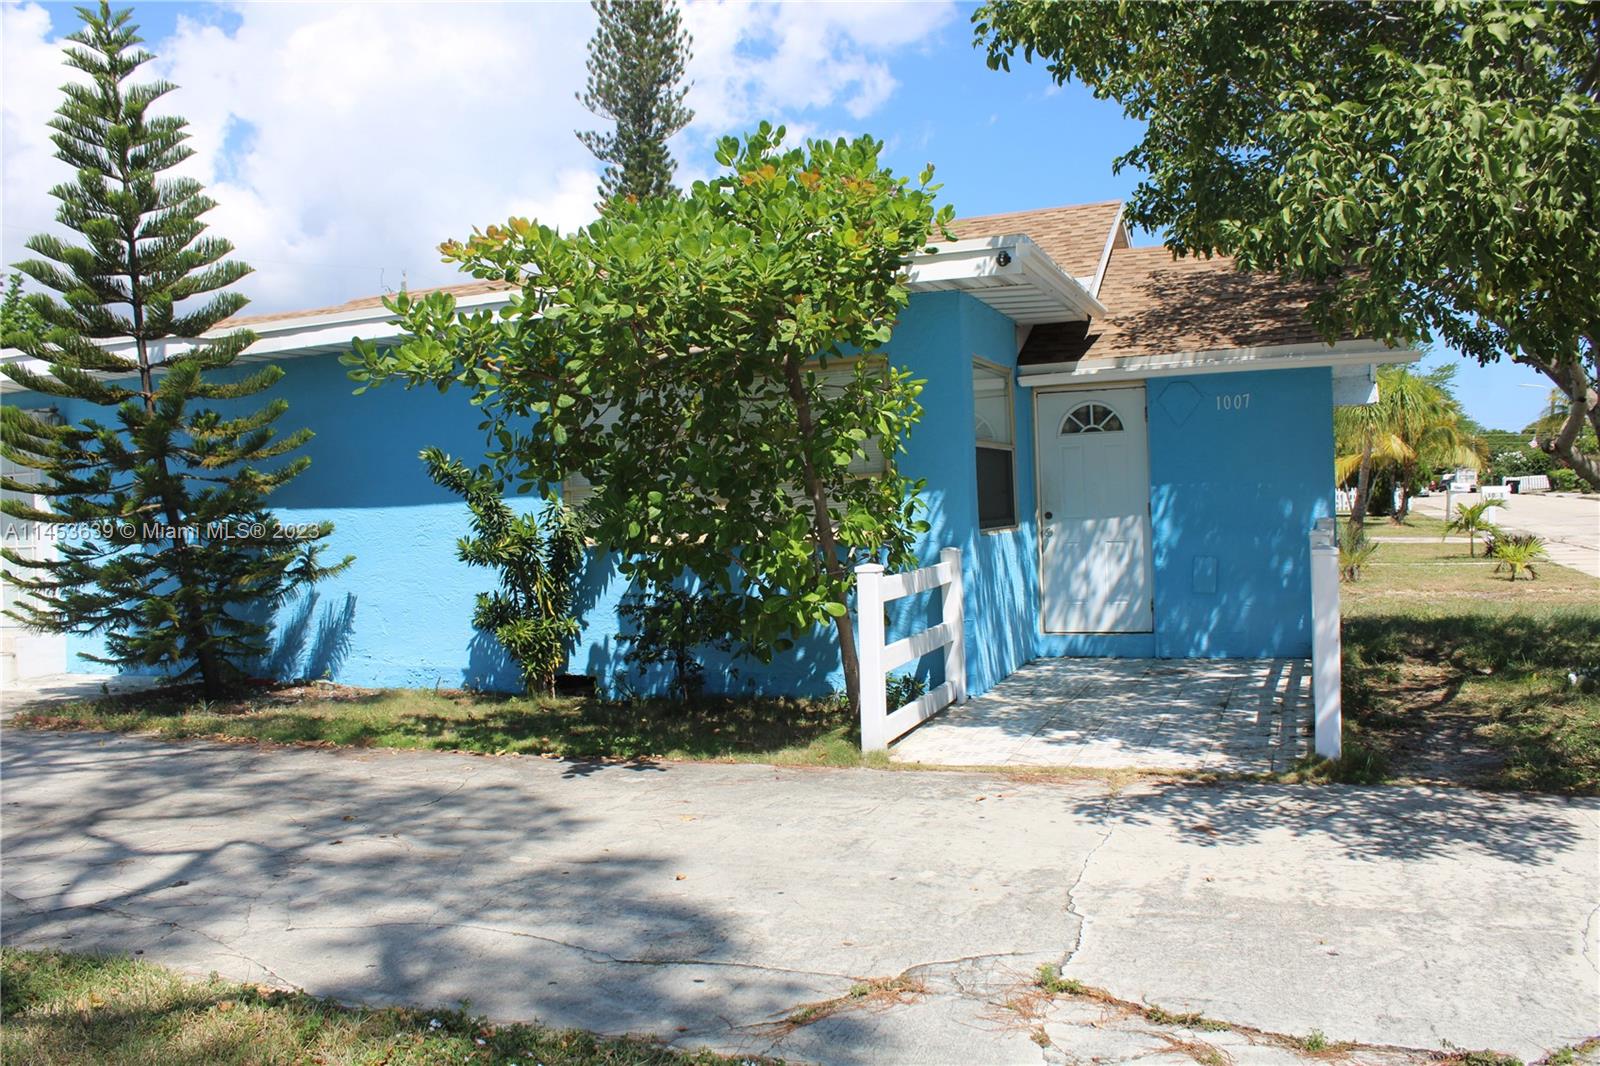 1007 N E St St, Lake Worth, Palm Beach County, Florida - 3 Bedrooms  
2 Bathrooms - 